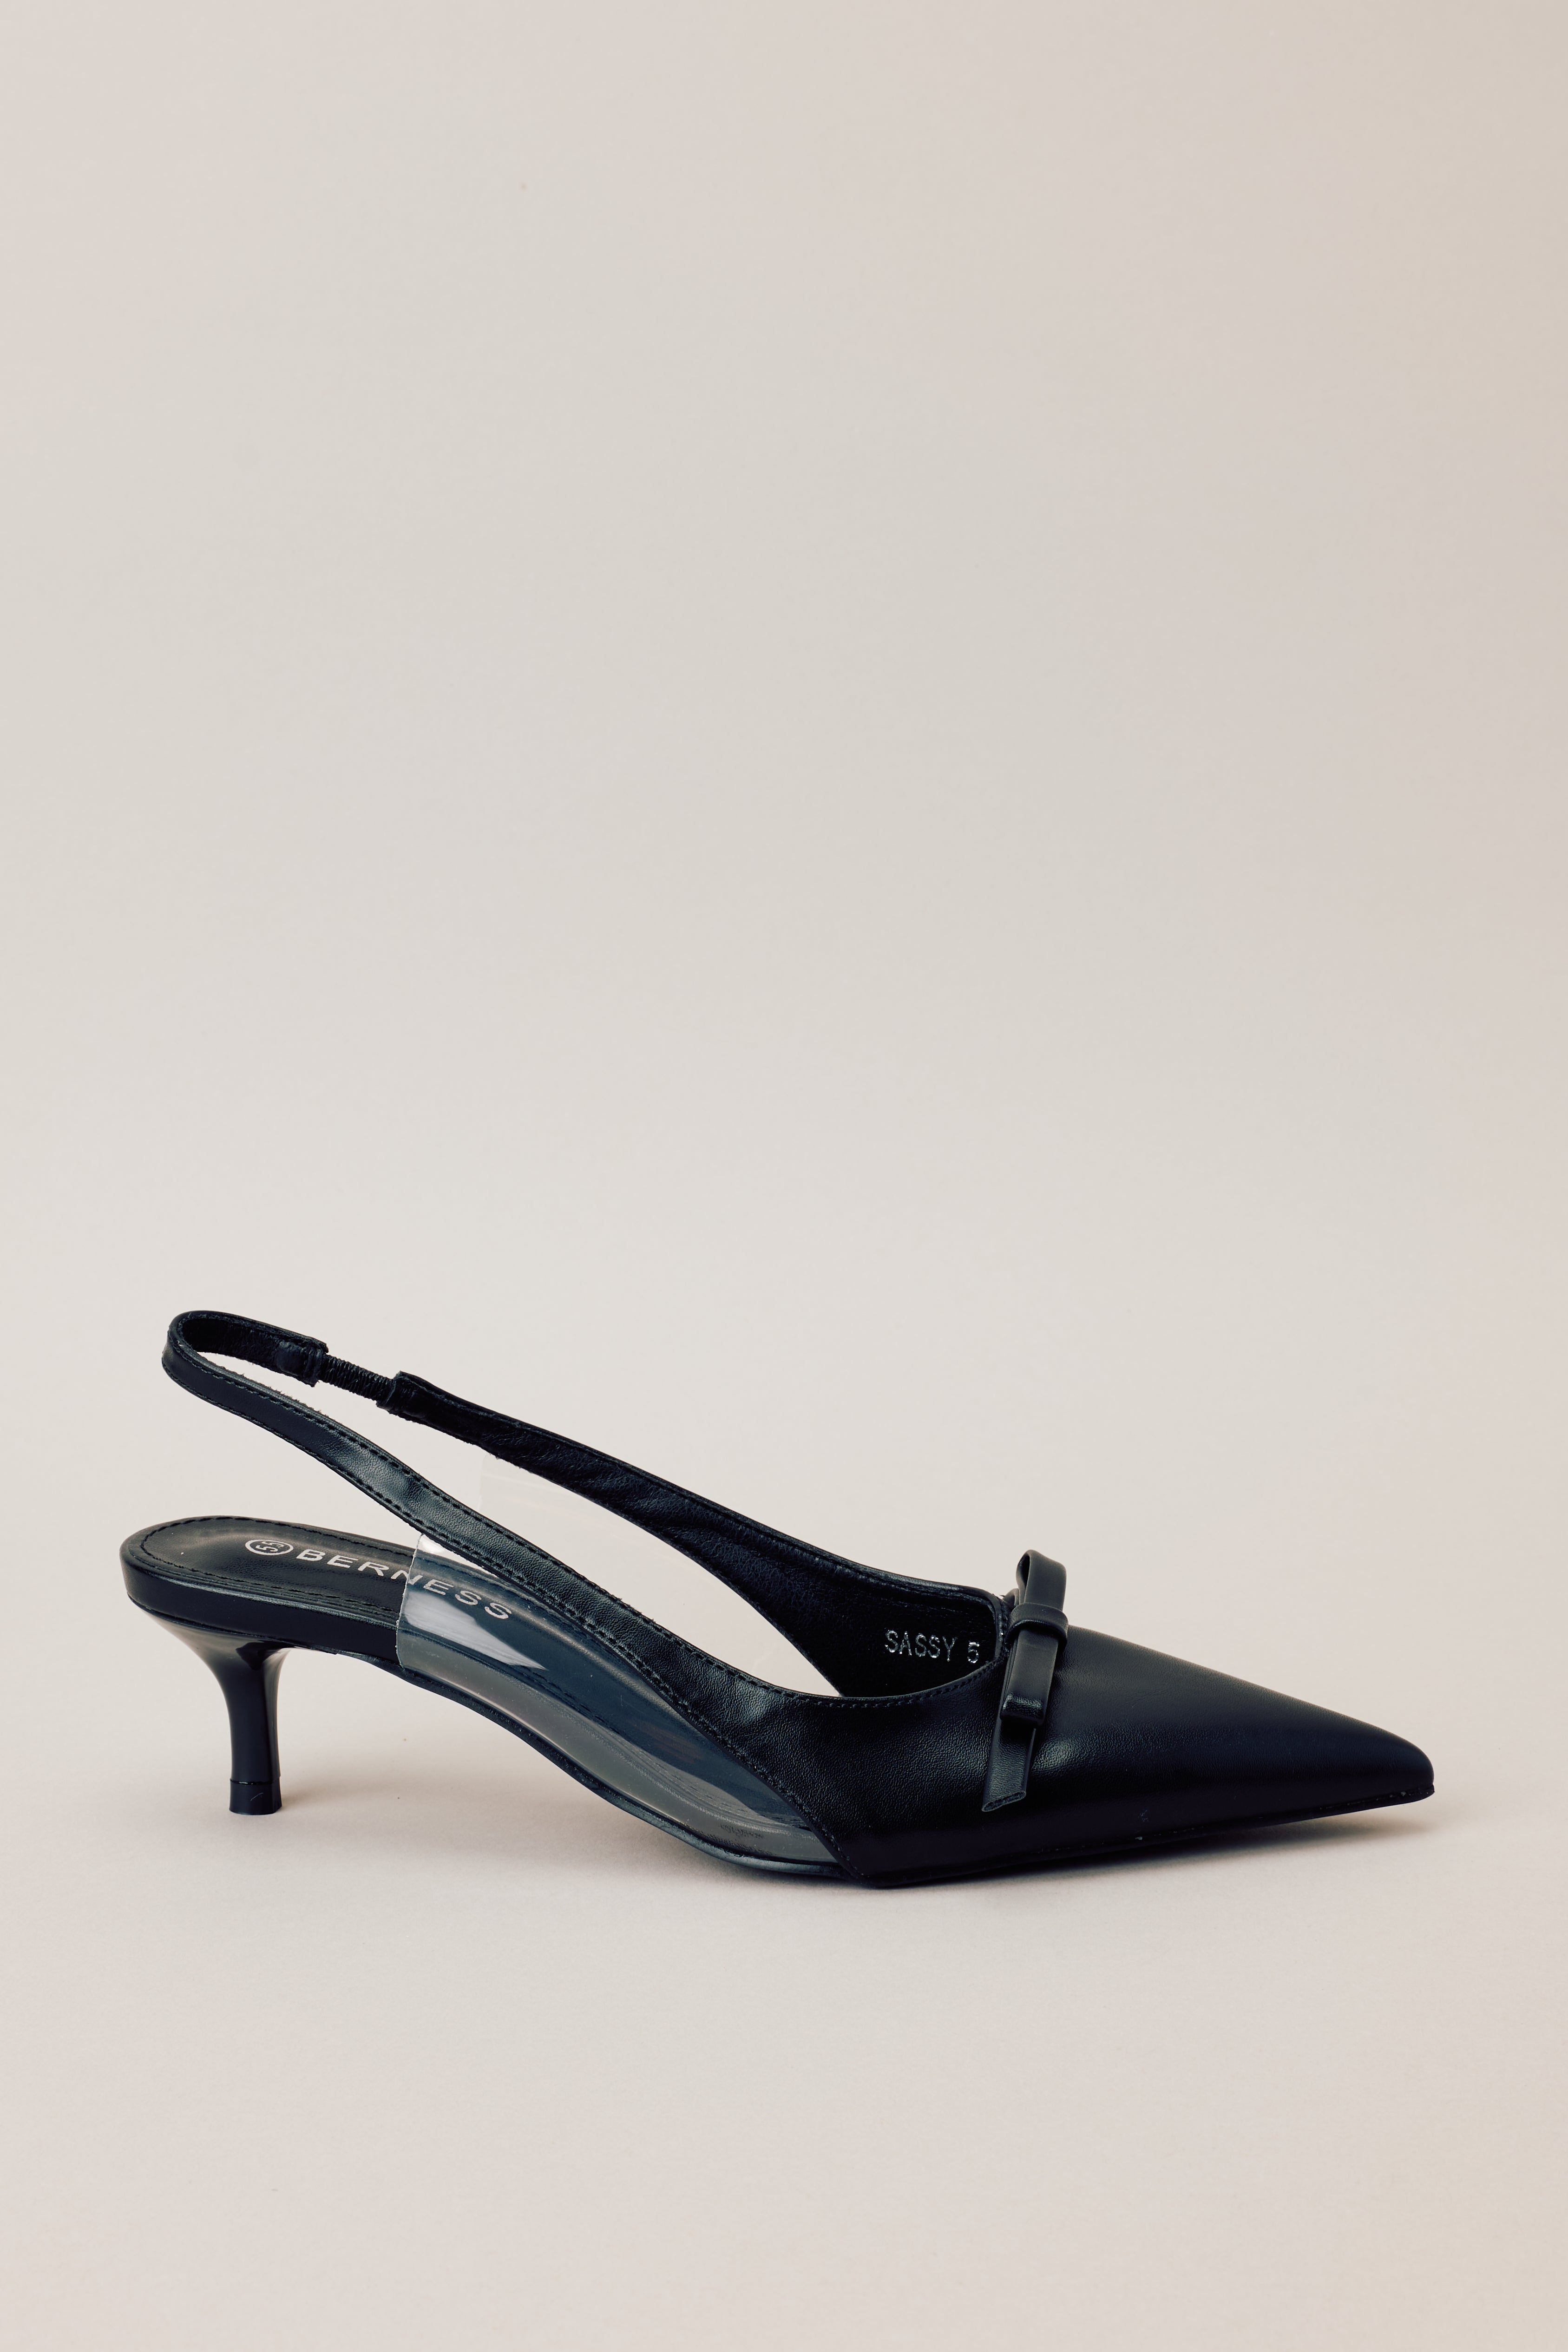 Side view of black kitten heels showcasing the pointed closed toe, delicate bow detailing, strap around the back of the foot, clear siding for extra support, and the short heel.